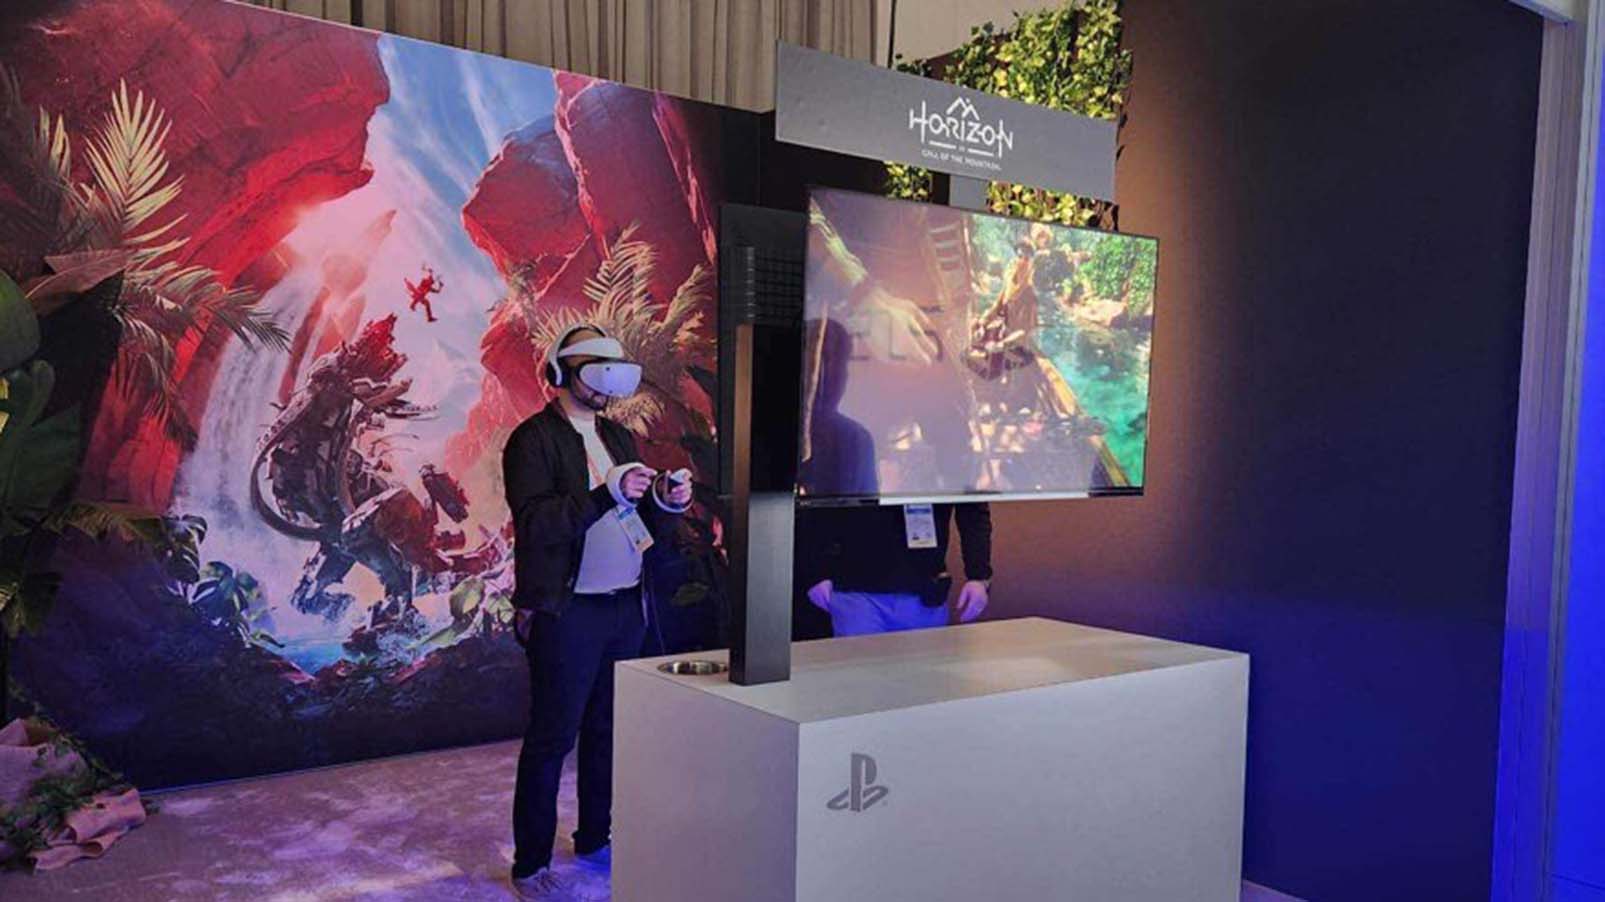 PSVR 2 Hands-on: Big Improvements Coming to Sony's Next VR Headset